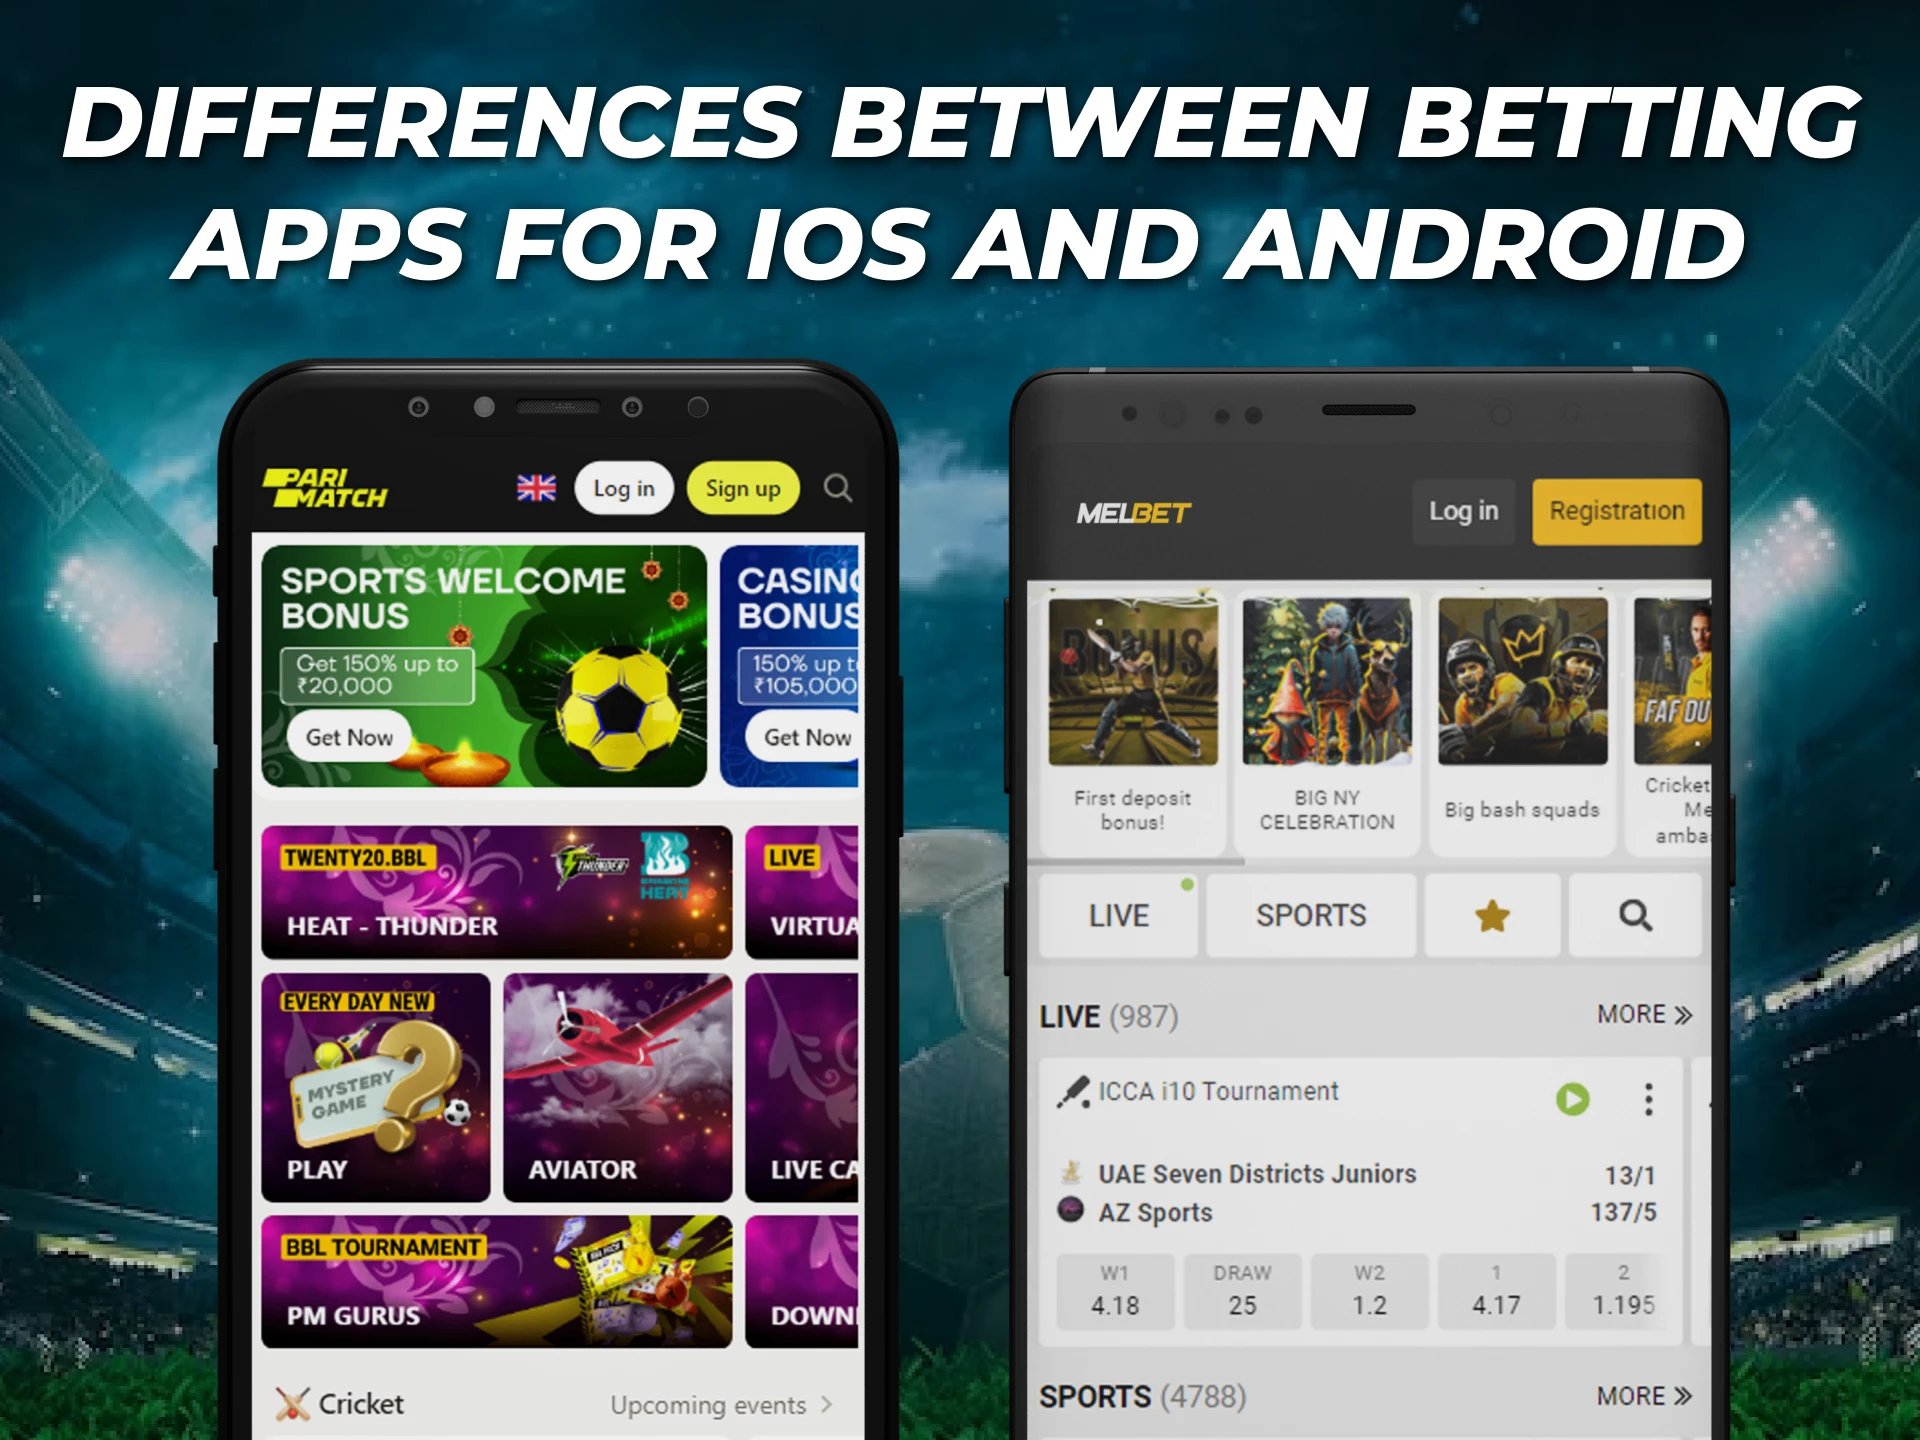 There are no differences between betting apps on iOS and Android devices.